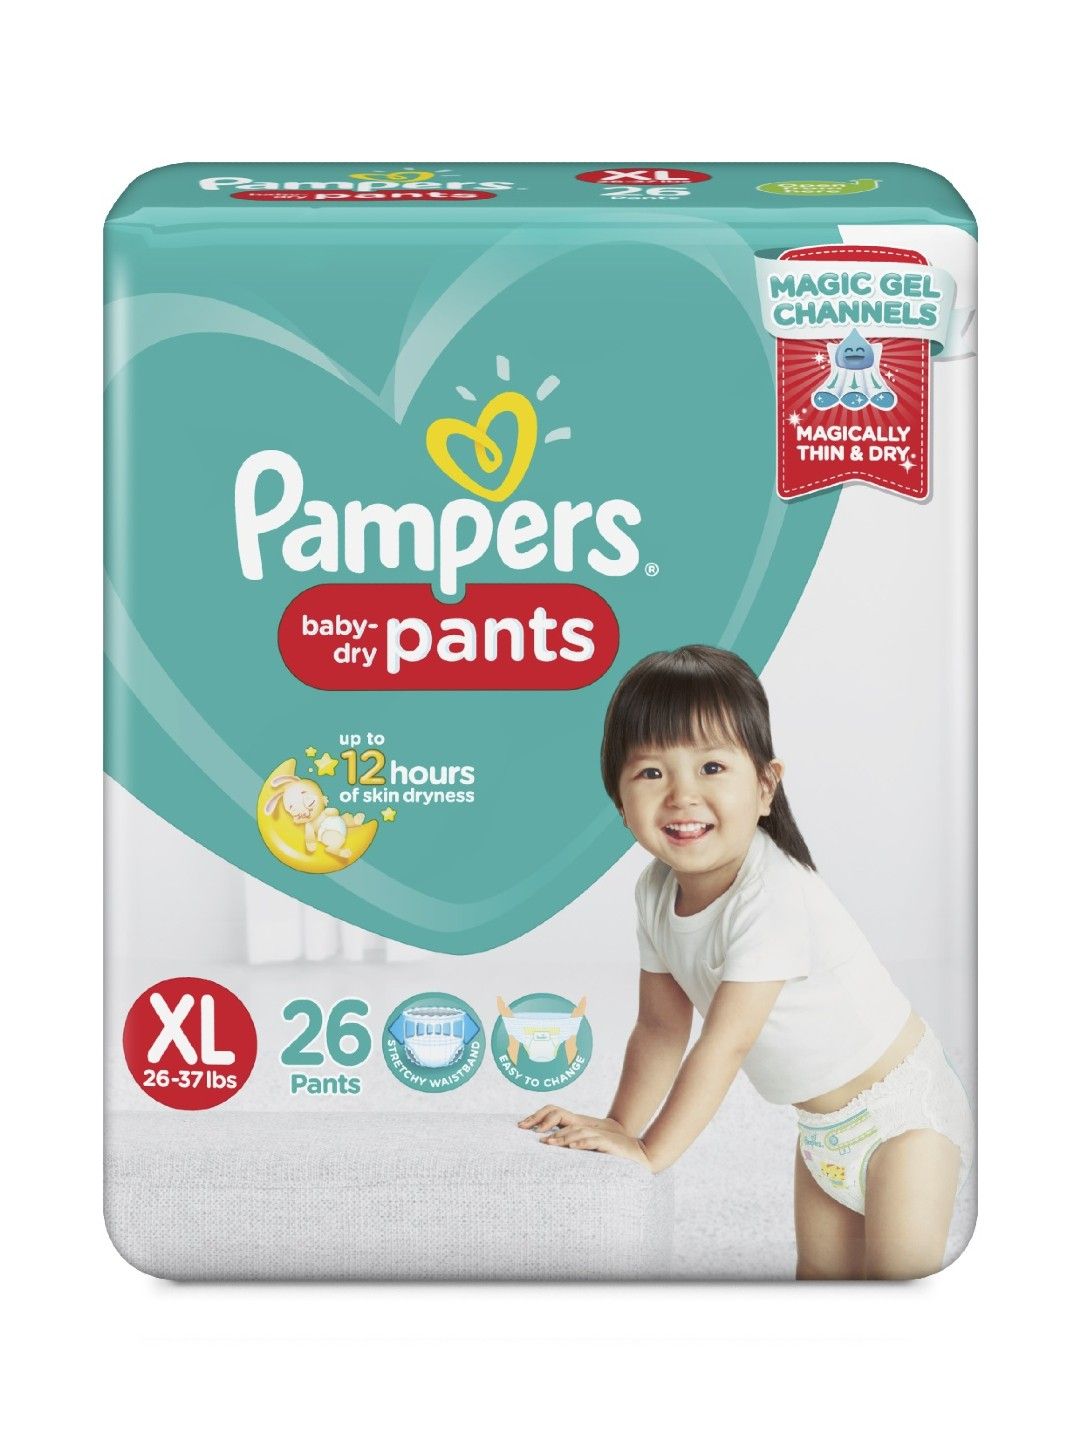 Pampers Baby Dry Pants XL 26s x 1 pack (26 pcs)